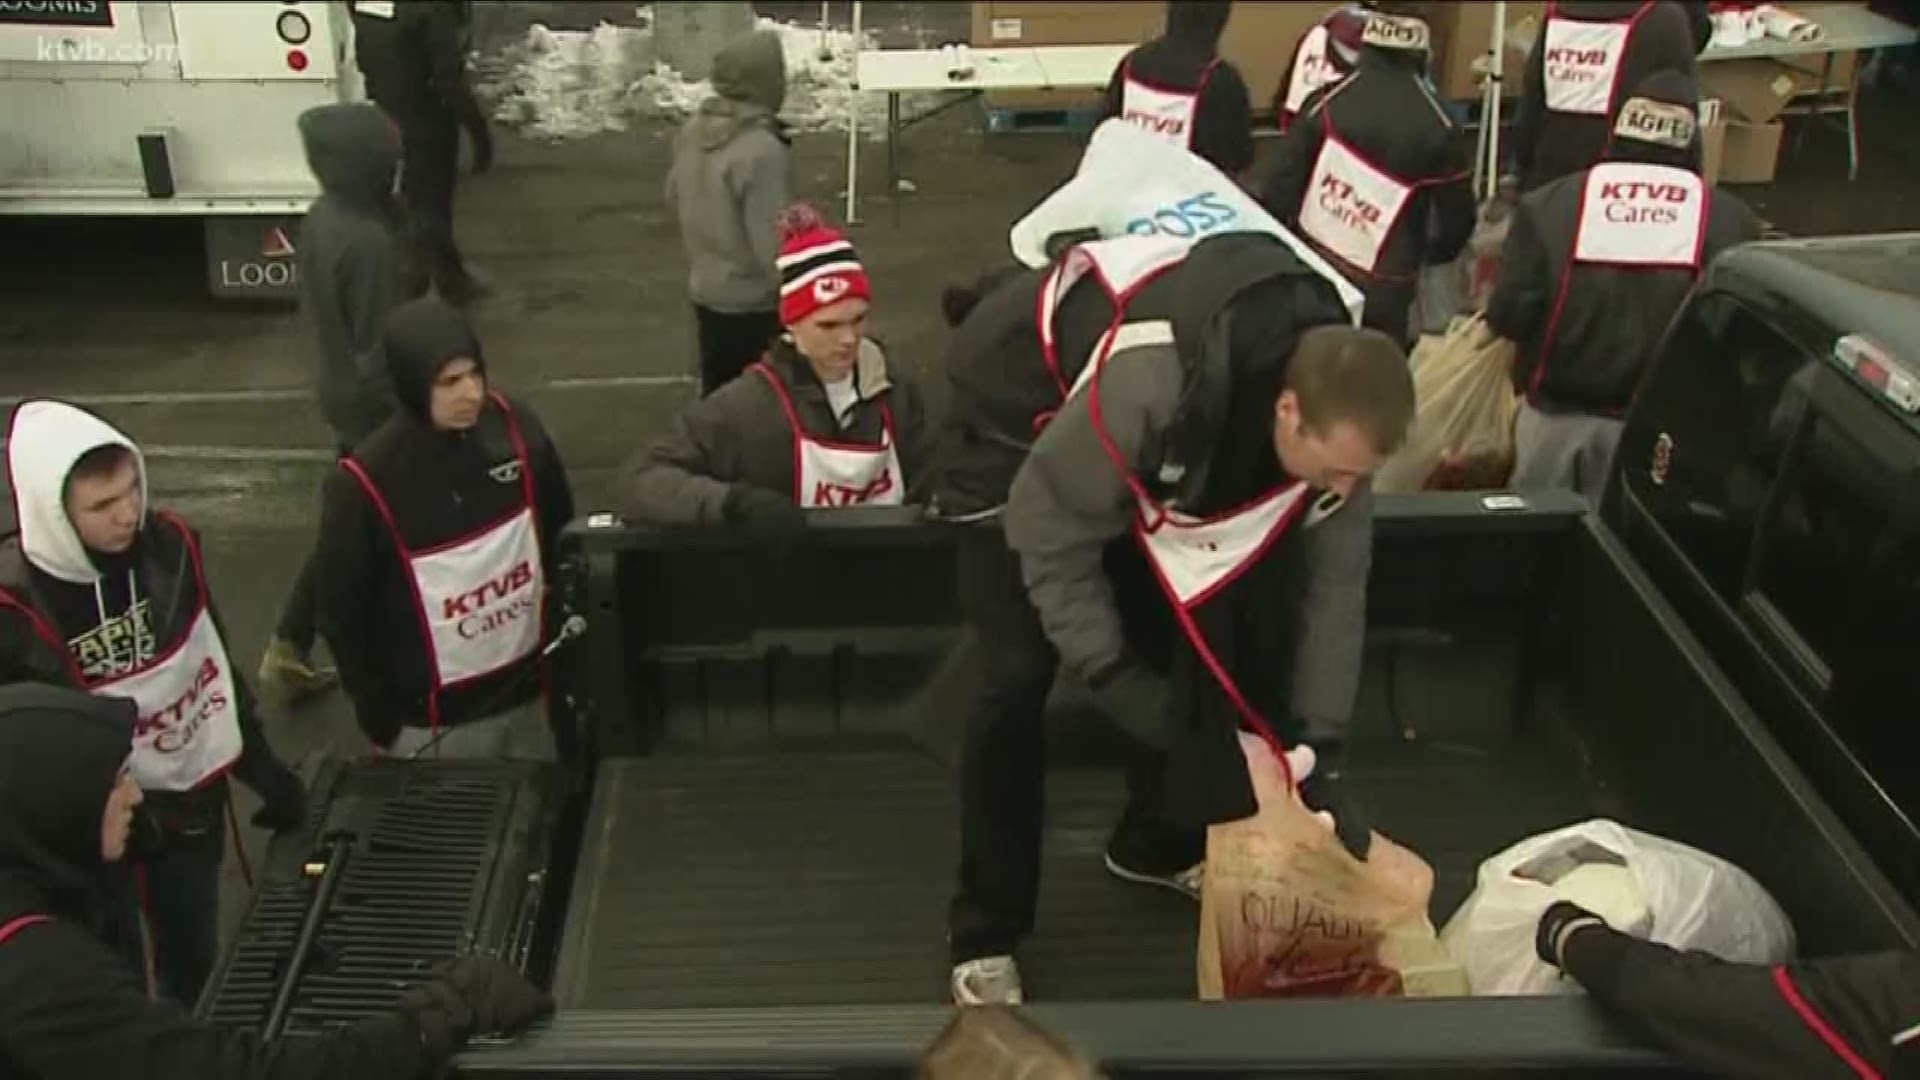 Here's a recap of 7Cares Idaho Shares day of sharing that KTVB and the community raised money and collected food for local charities around the Treasure Valley.